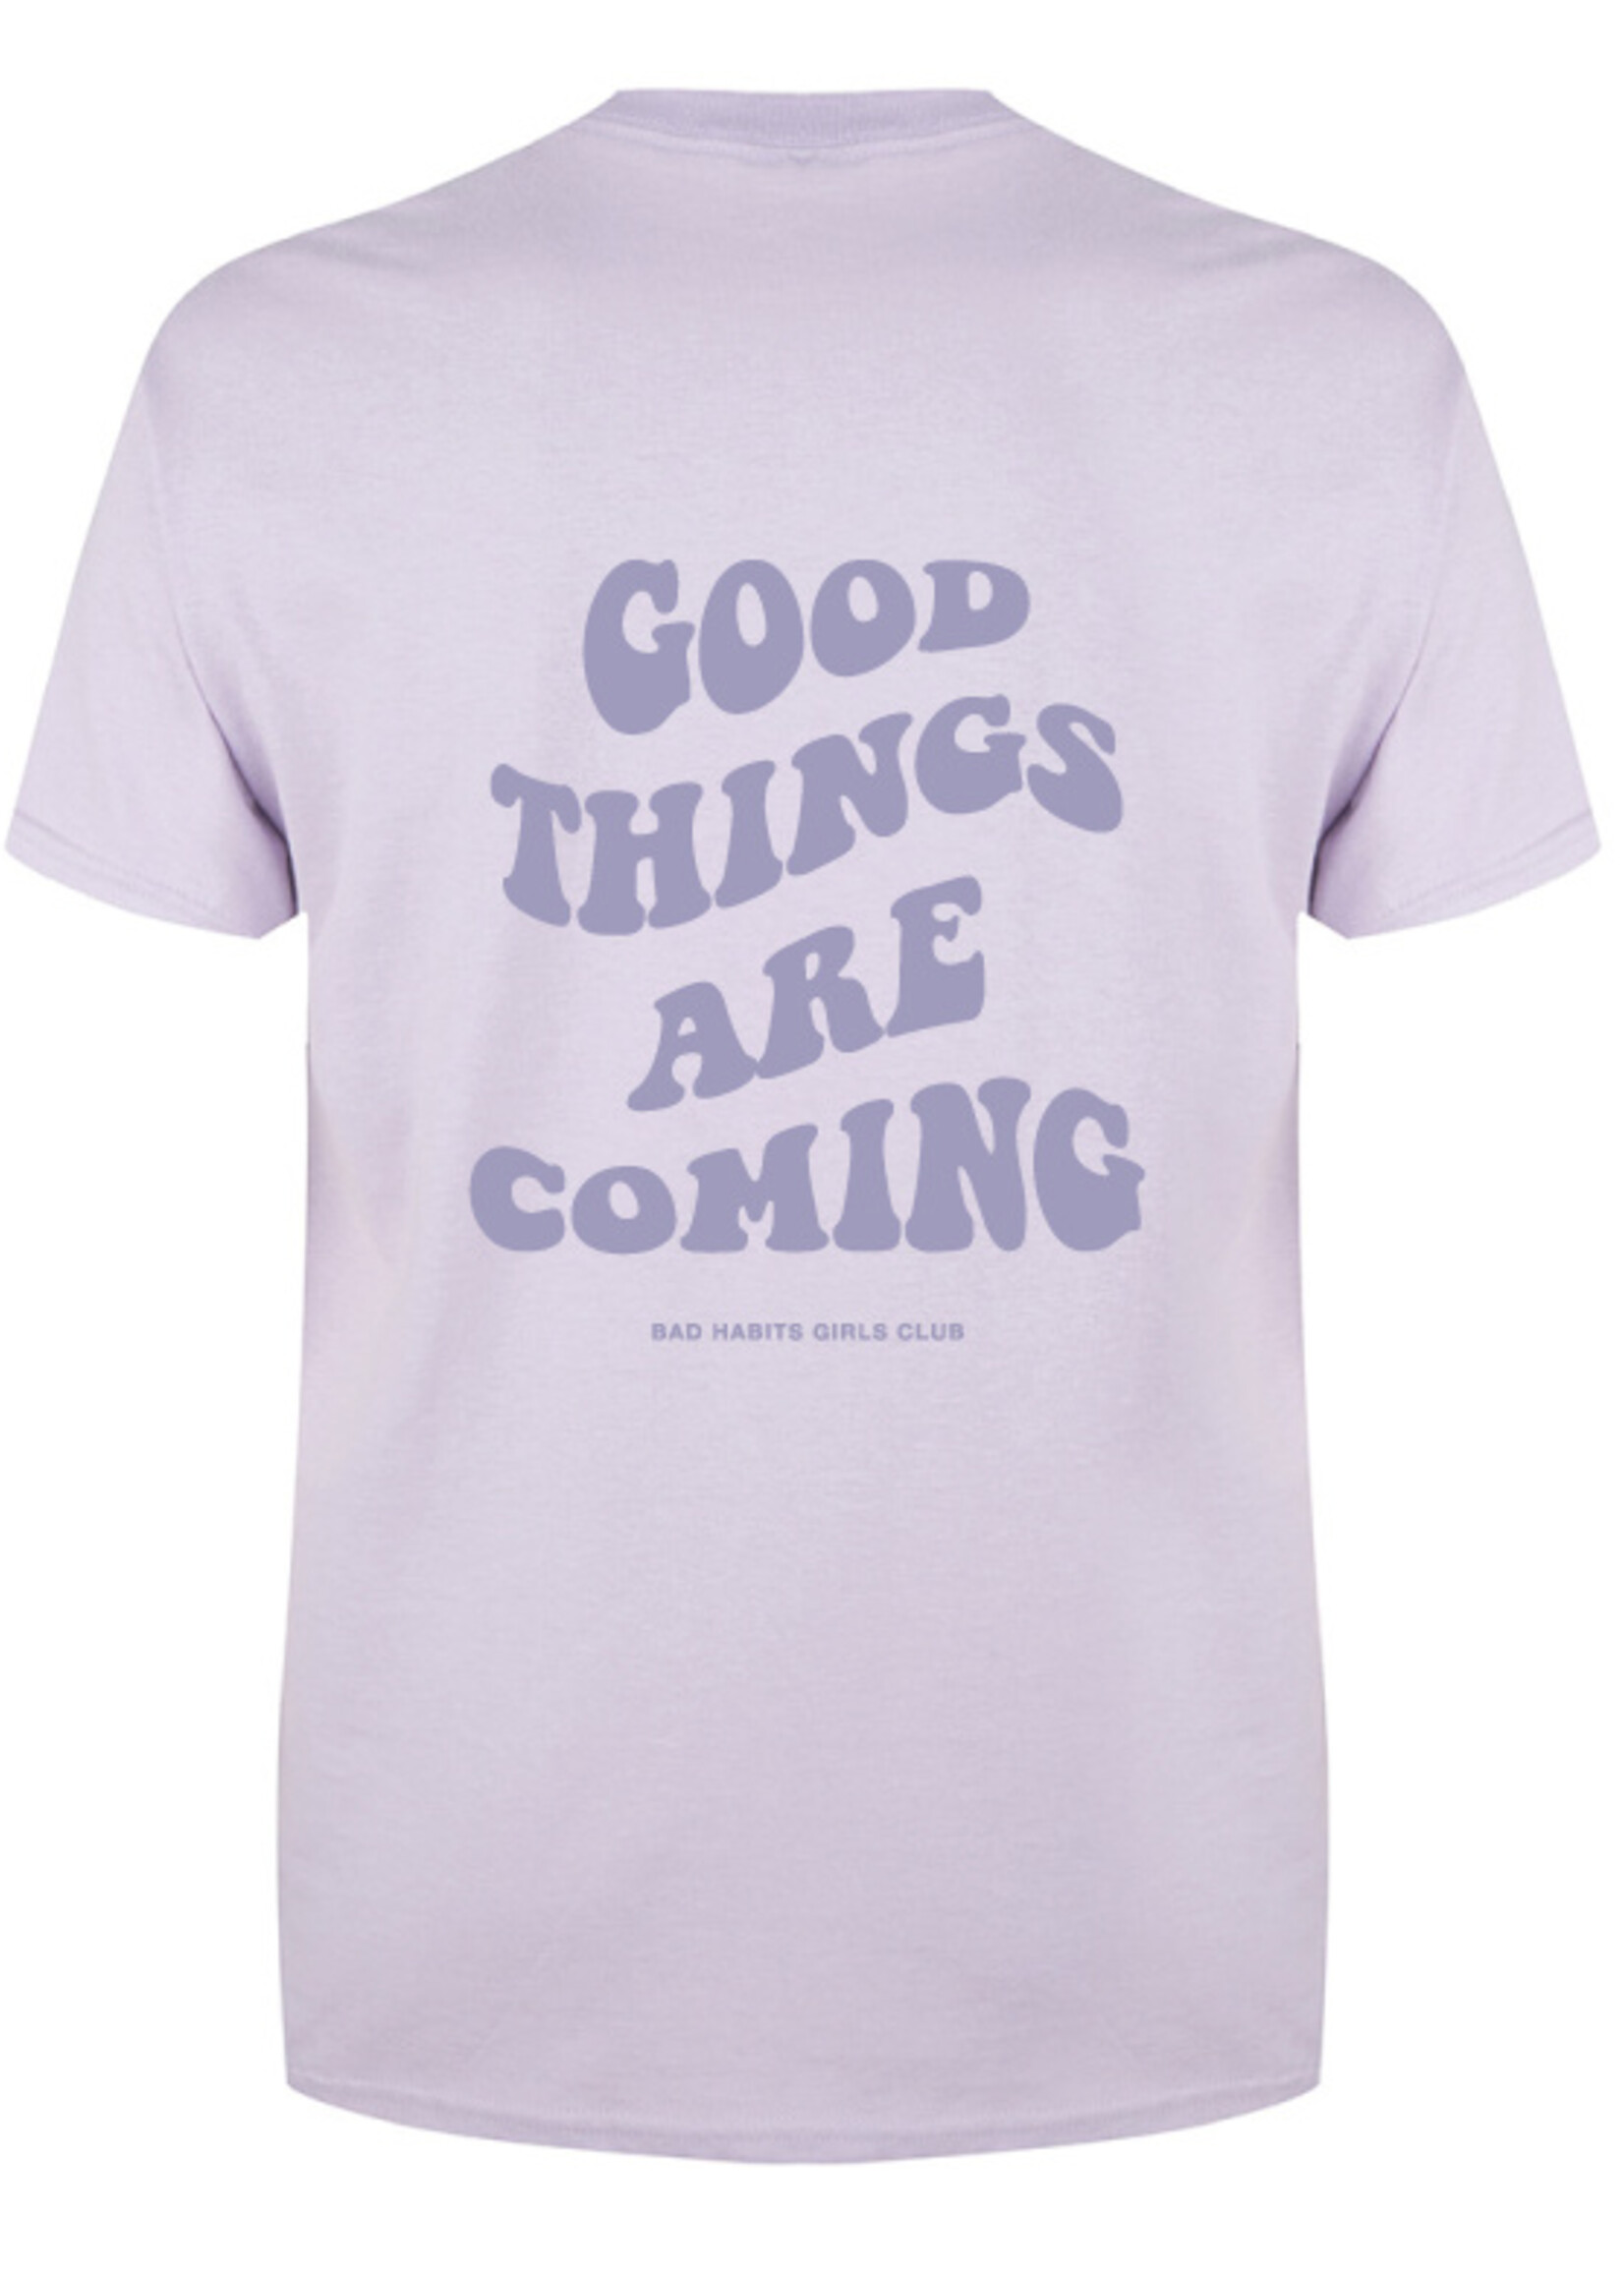 GOOD THINGS ARE COMING TEE